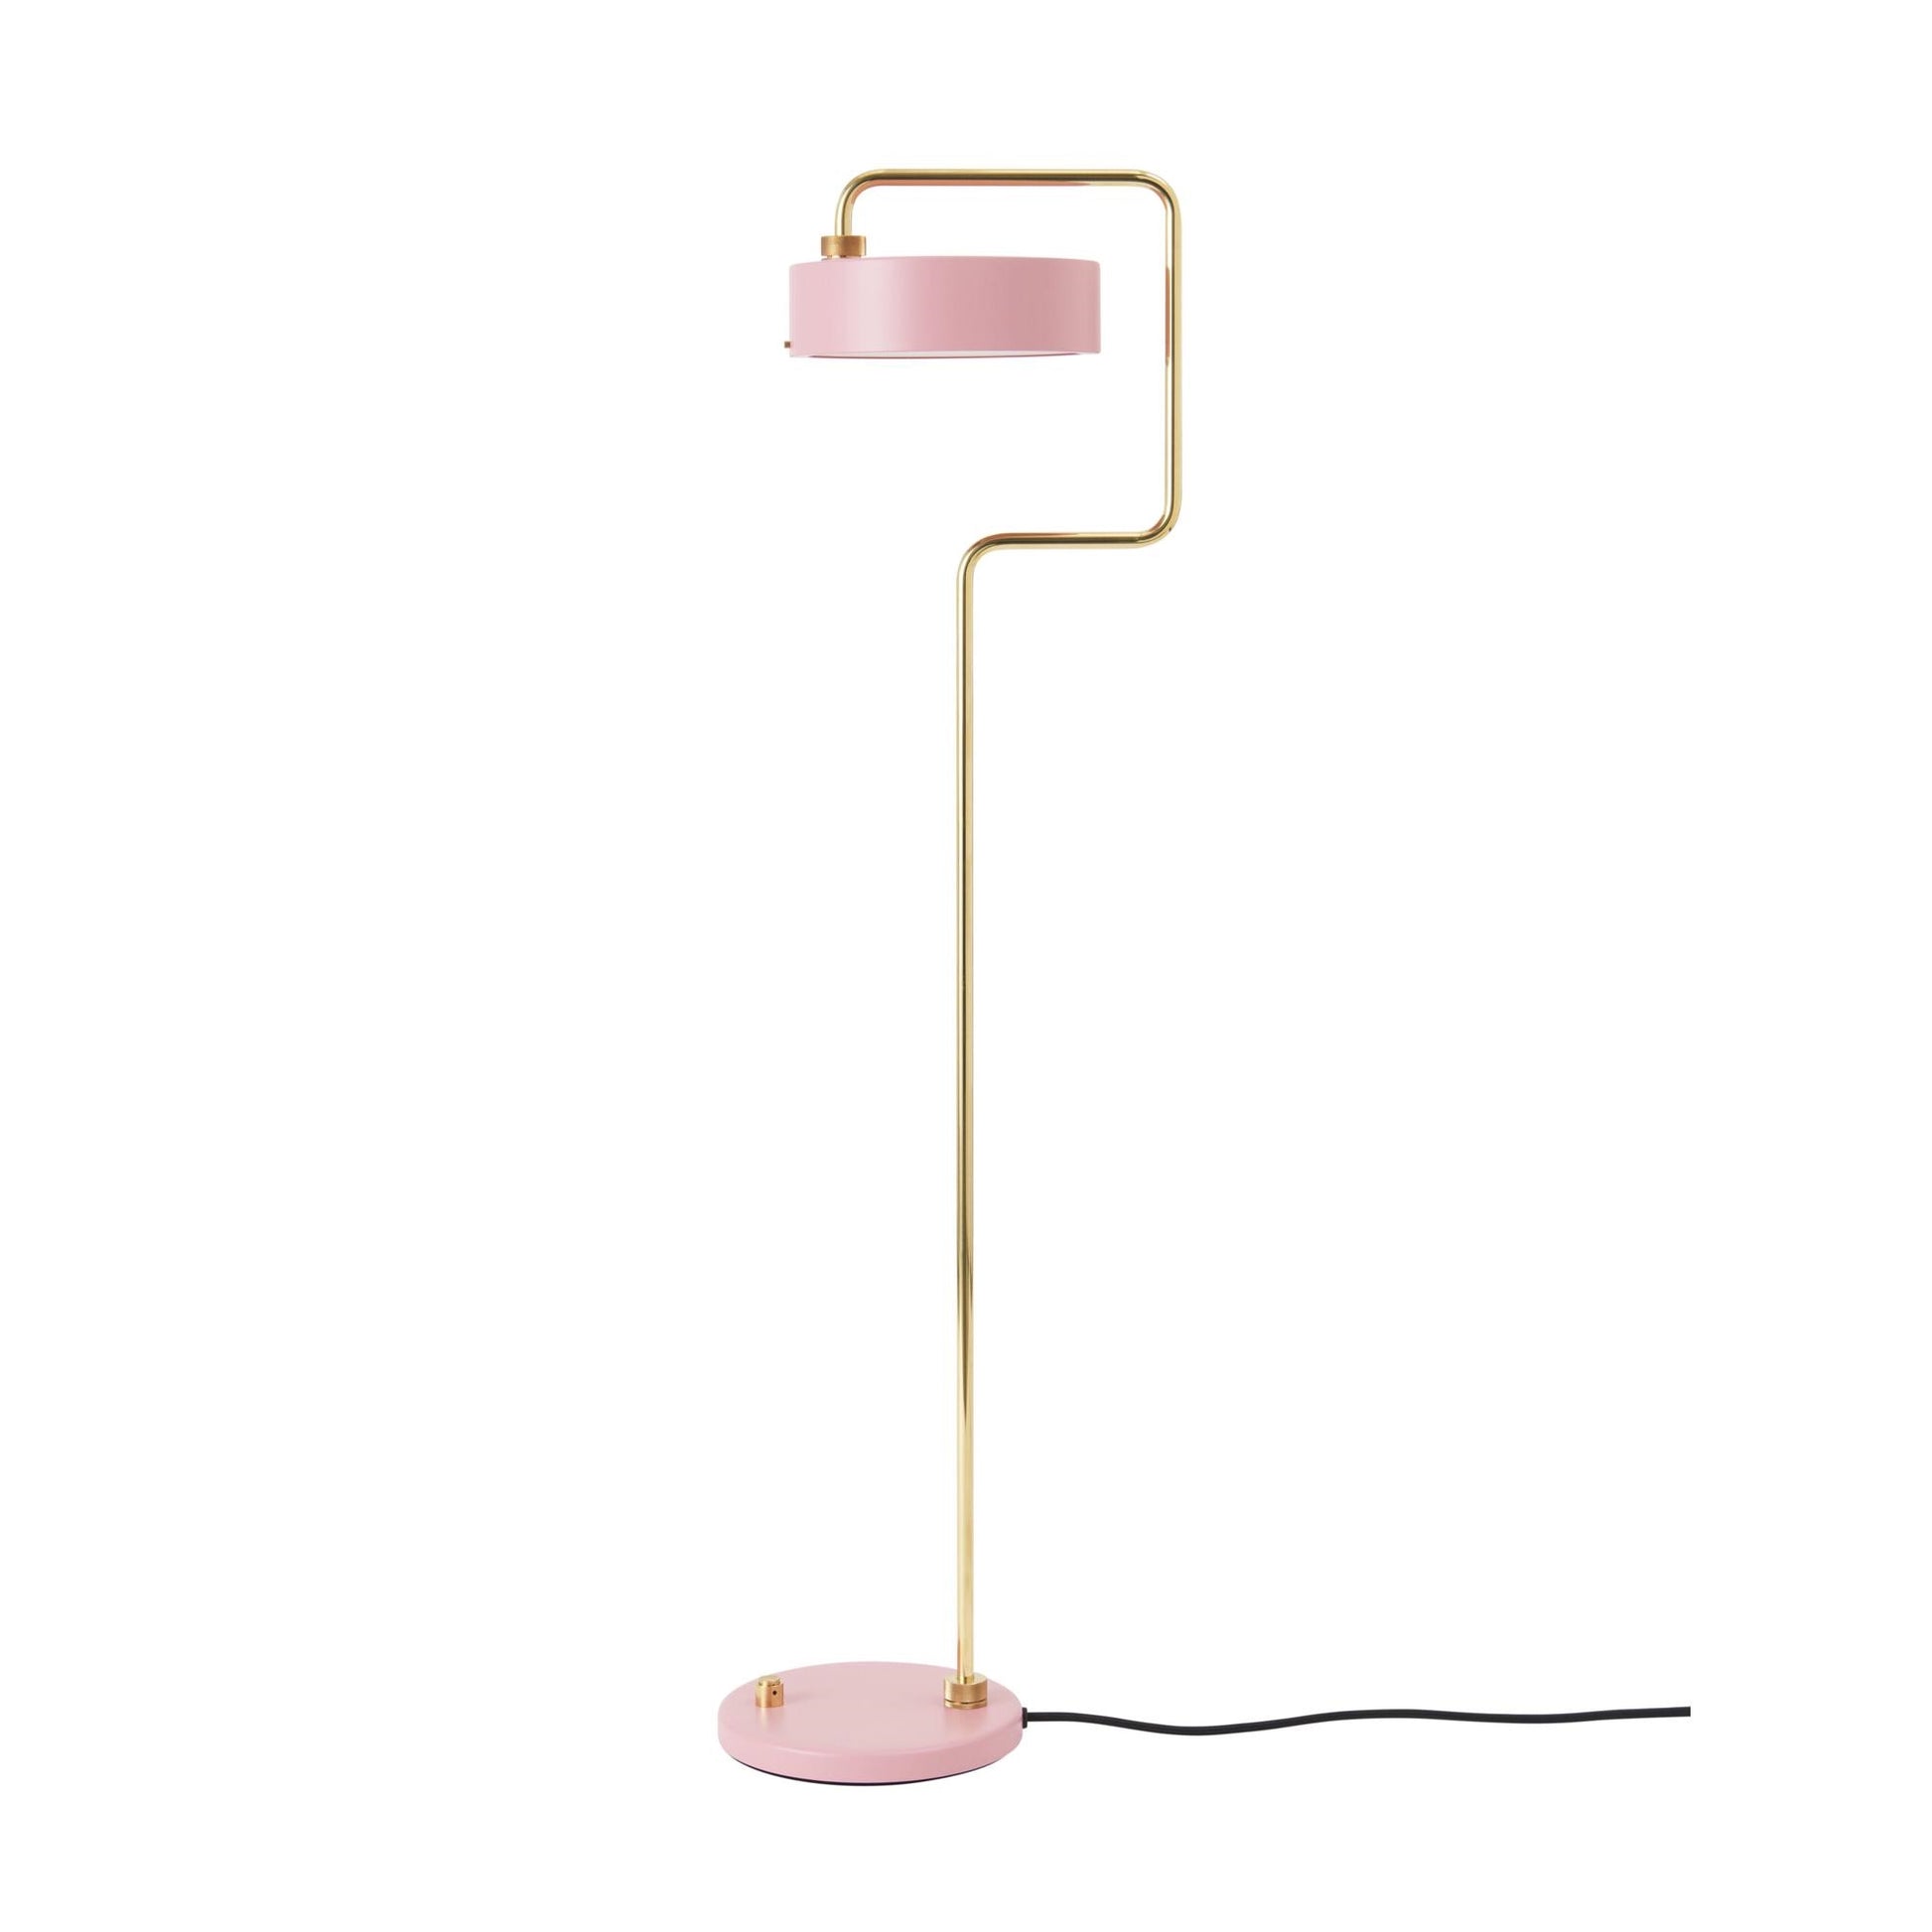 Petite Machine Floor Lamp 01 by Made By Hand #Pink